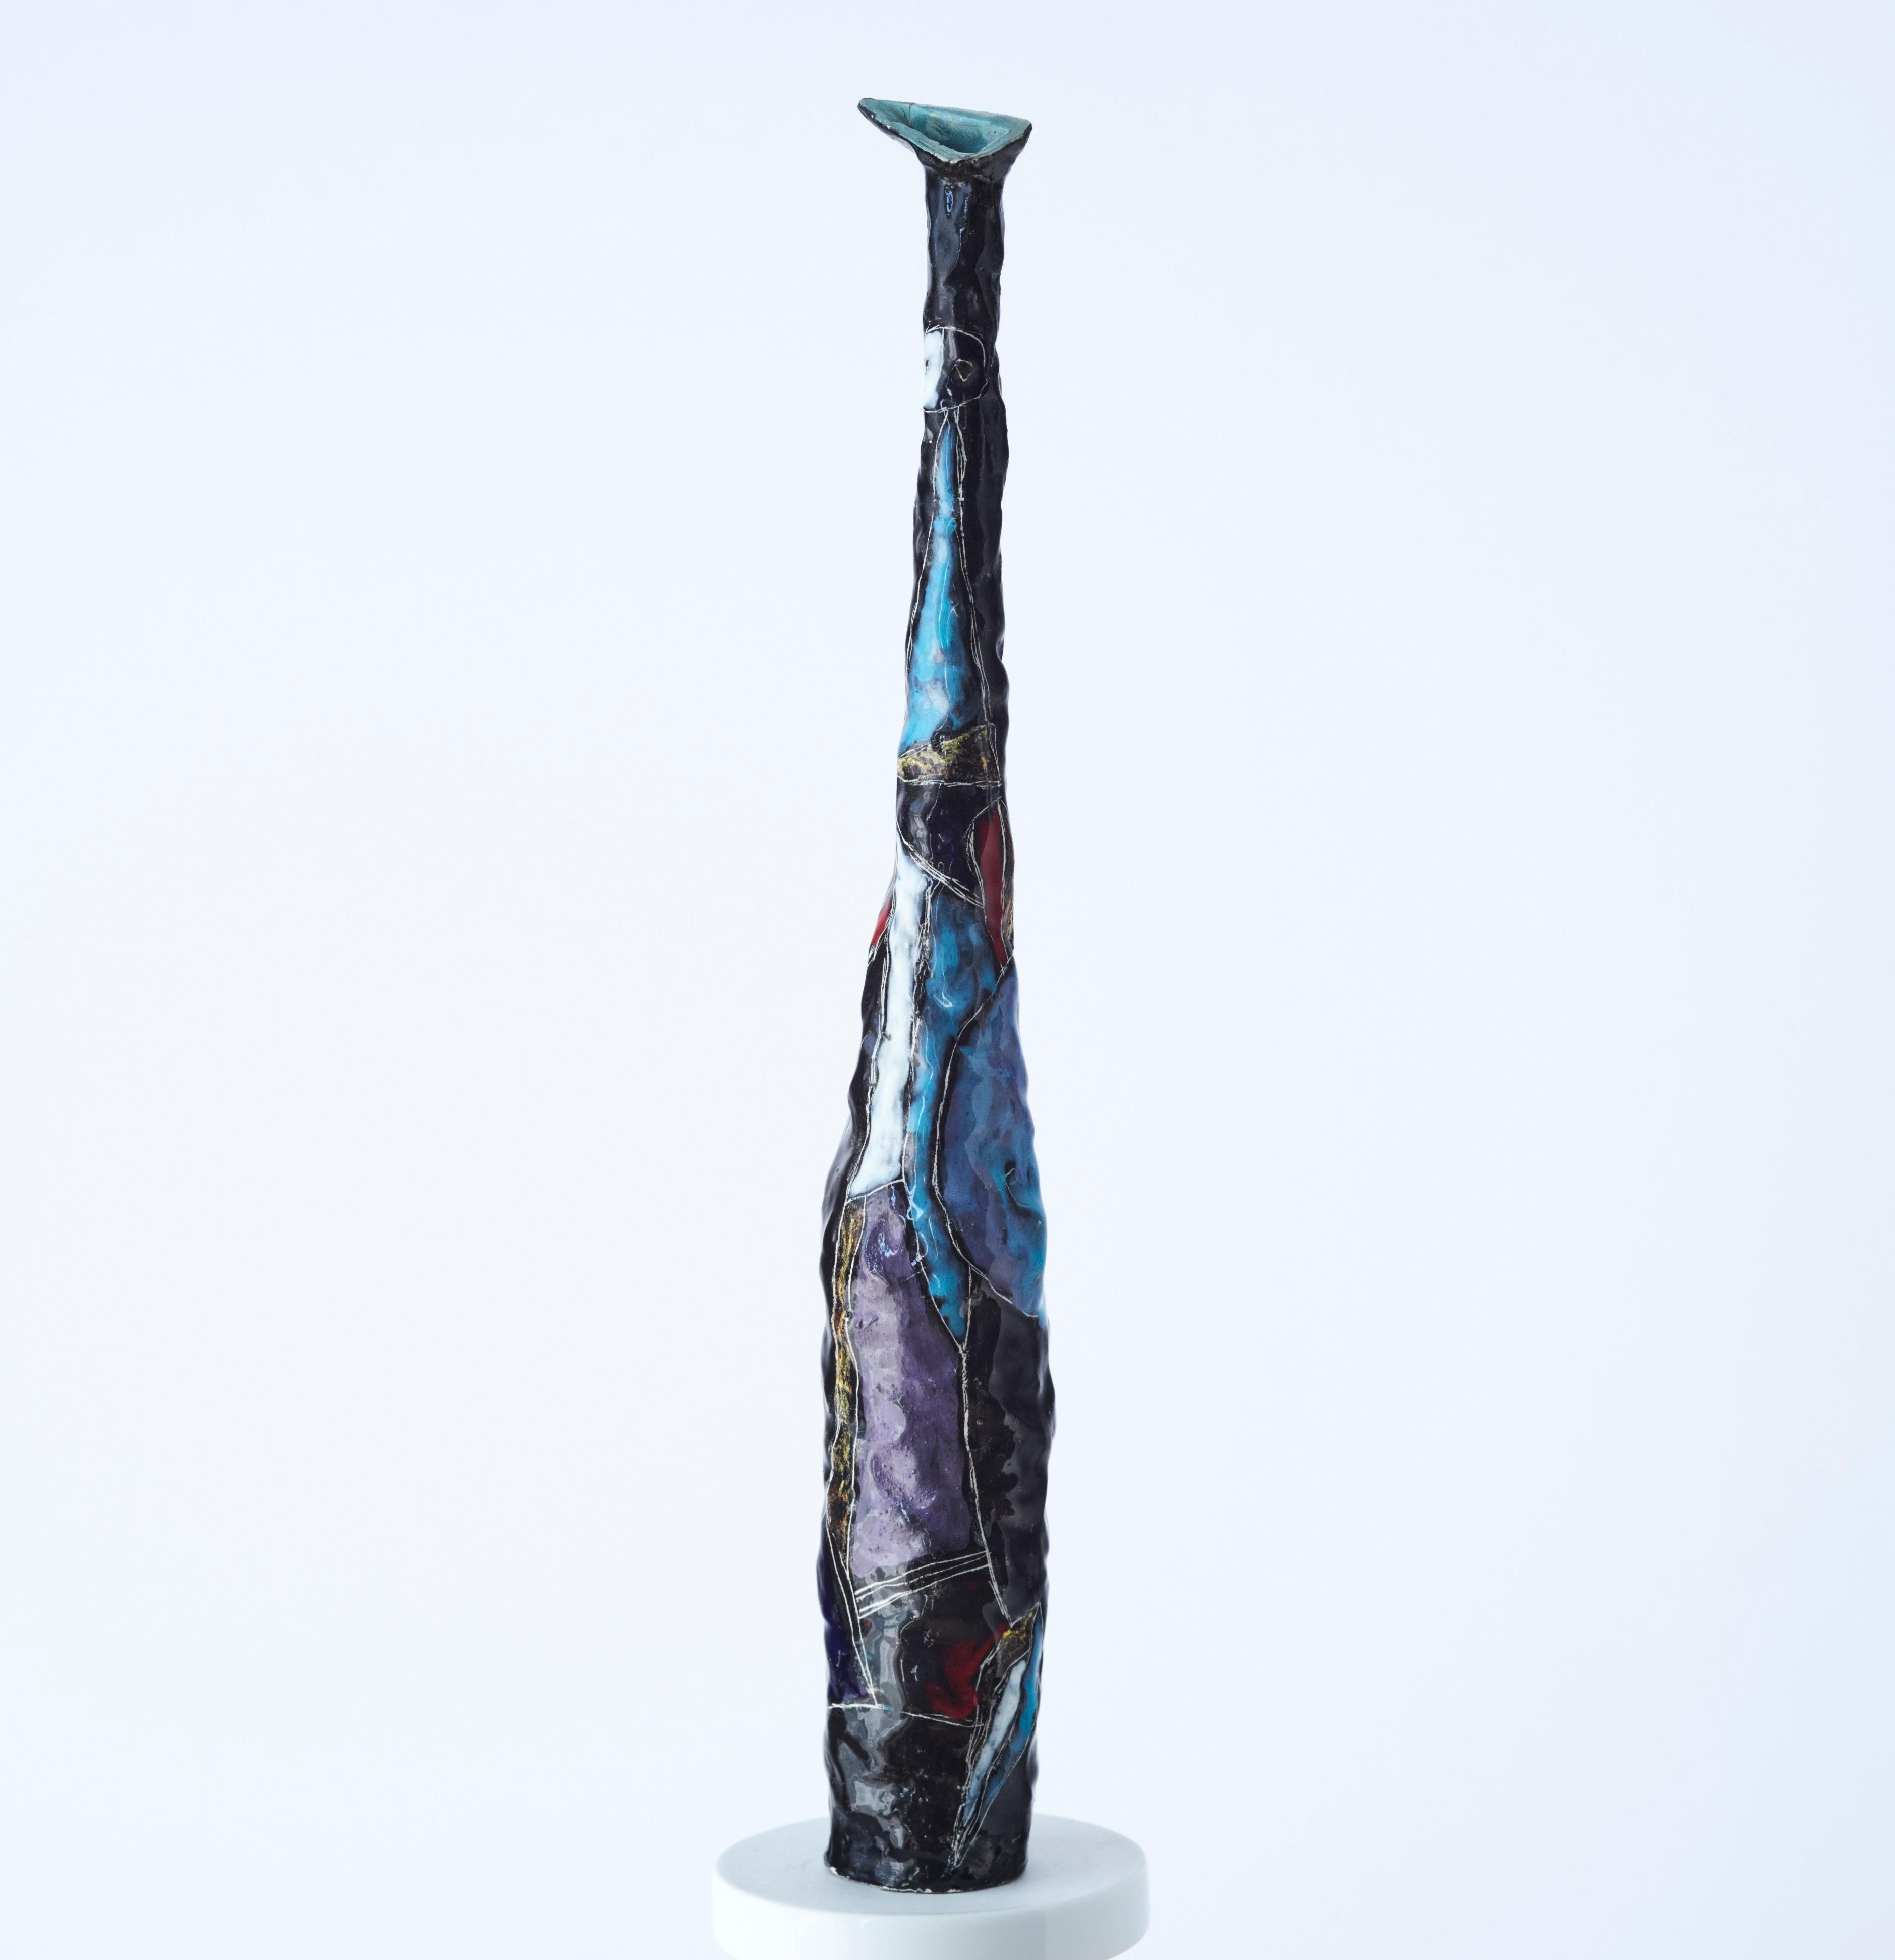 Studio ceramic vase by Marcello Fantoni. Vase in form of a bottle with triangular spout. Hand-built earthenware with shiny black glaze and multicolored decor on front. Signed underneath.
       